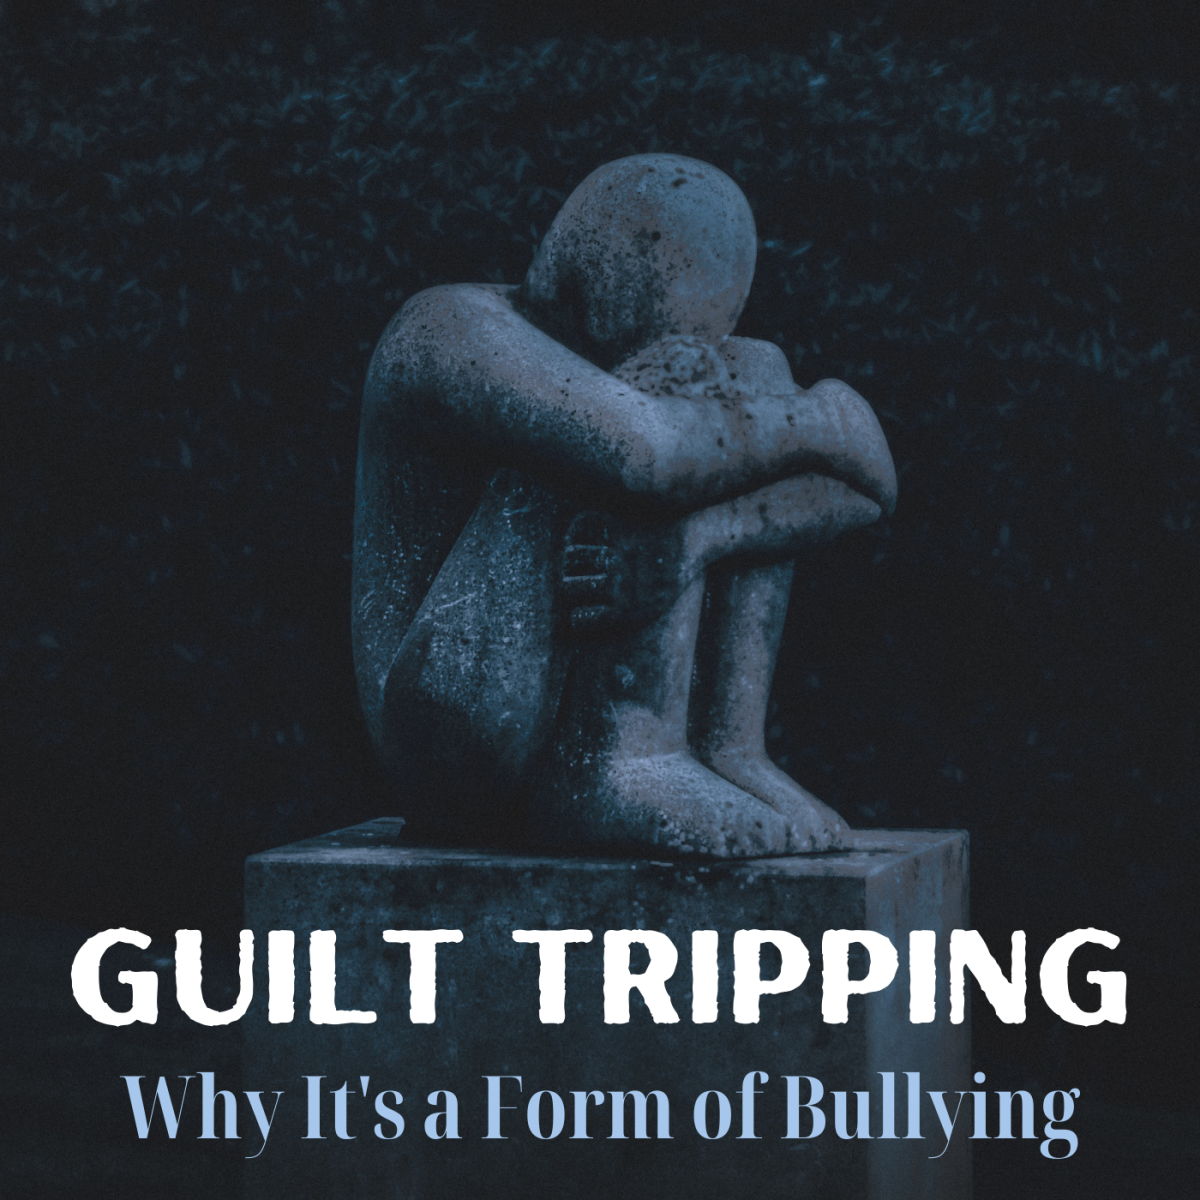 Why Guilt Tripping Is a Form of Bullying